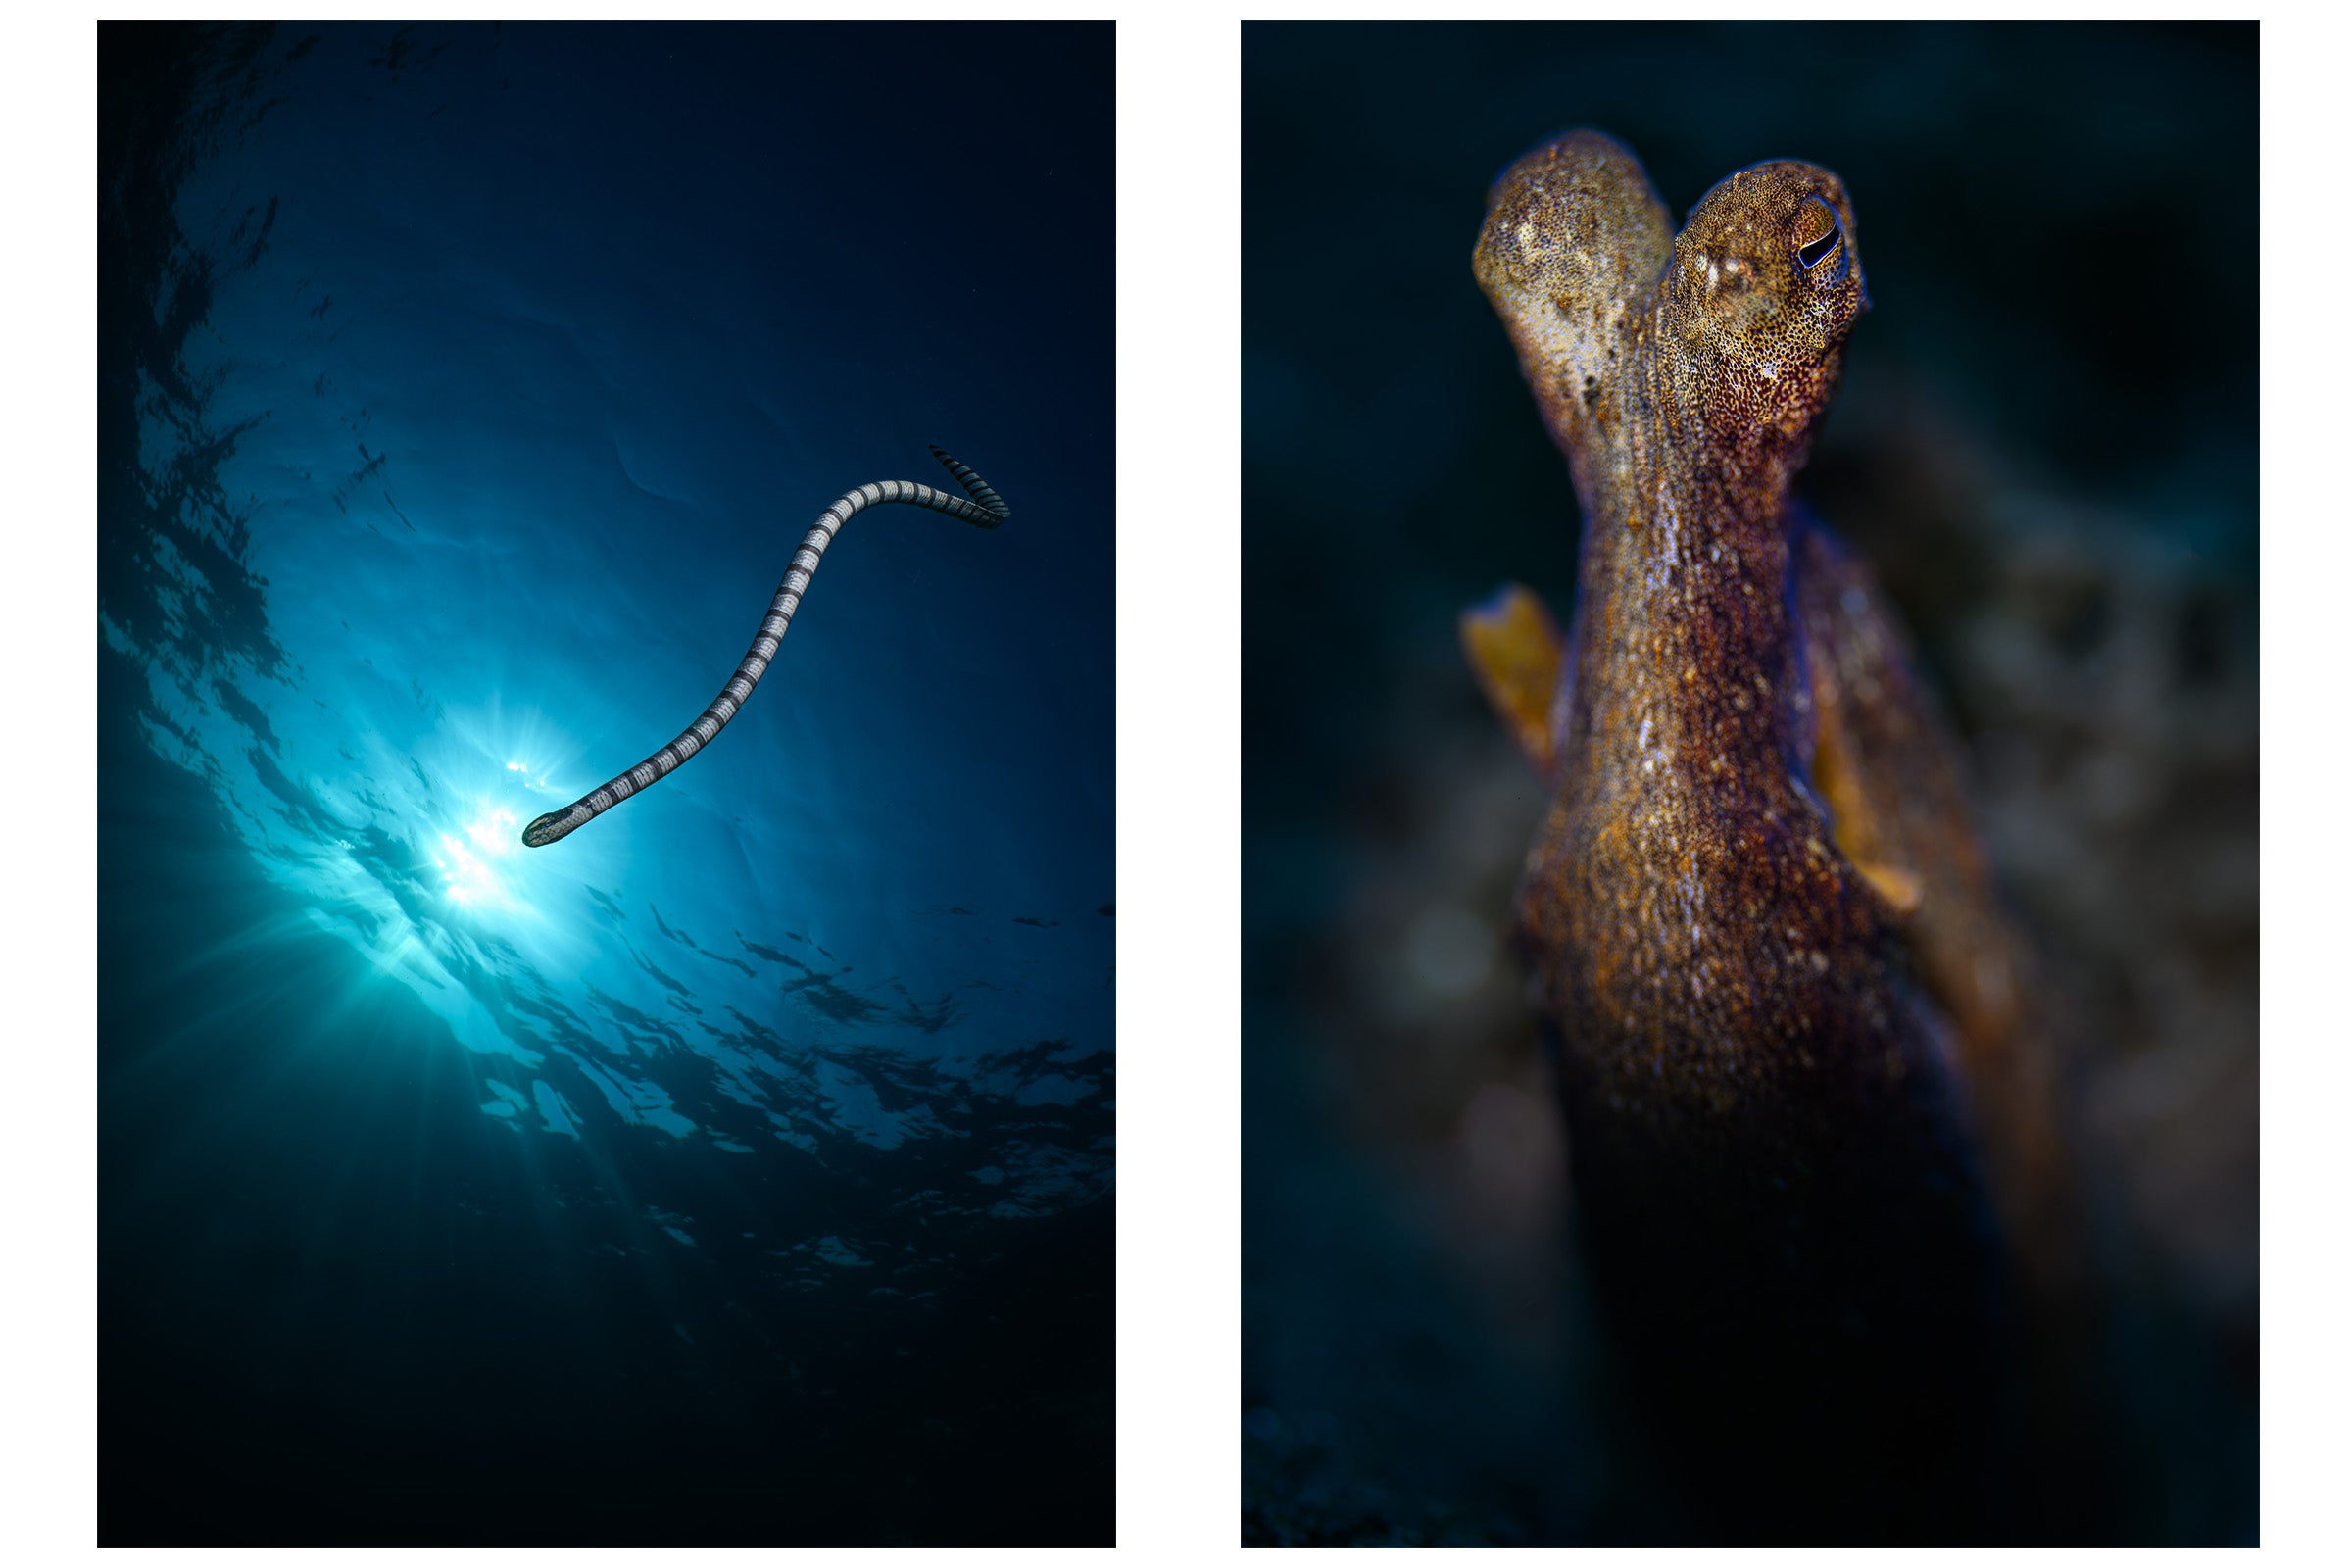 olive sea snake and longarm octopus